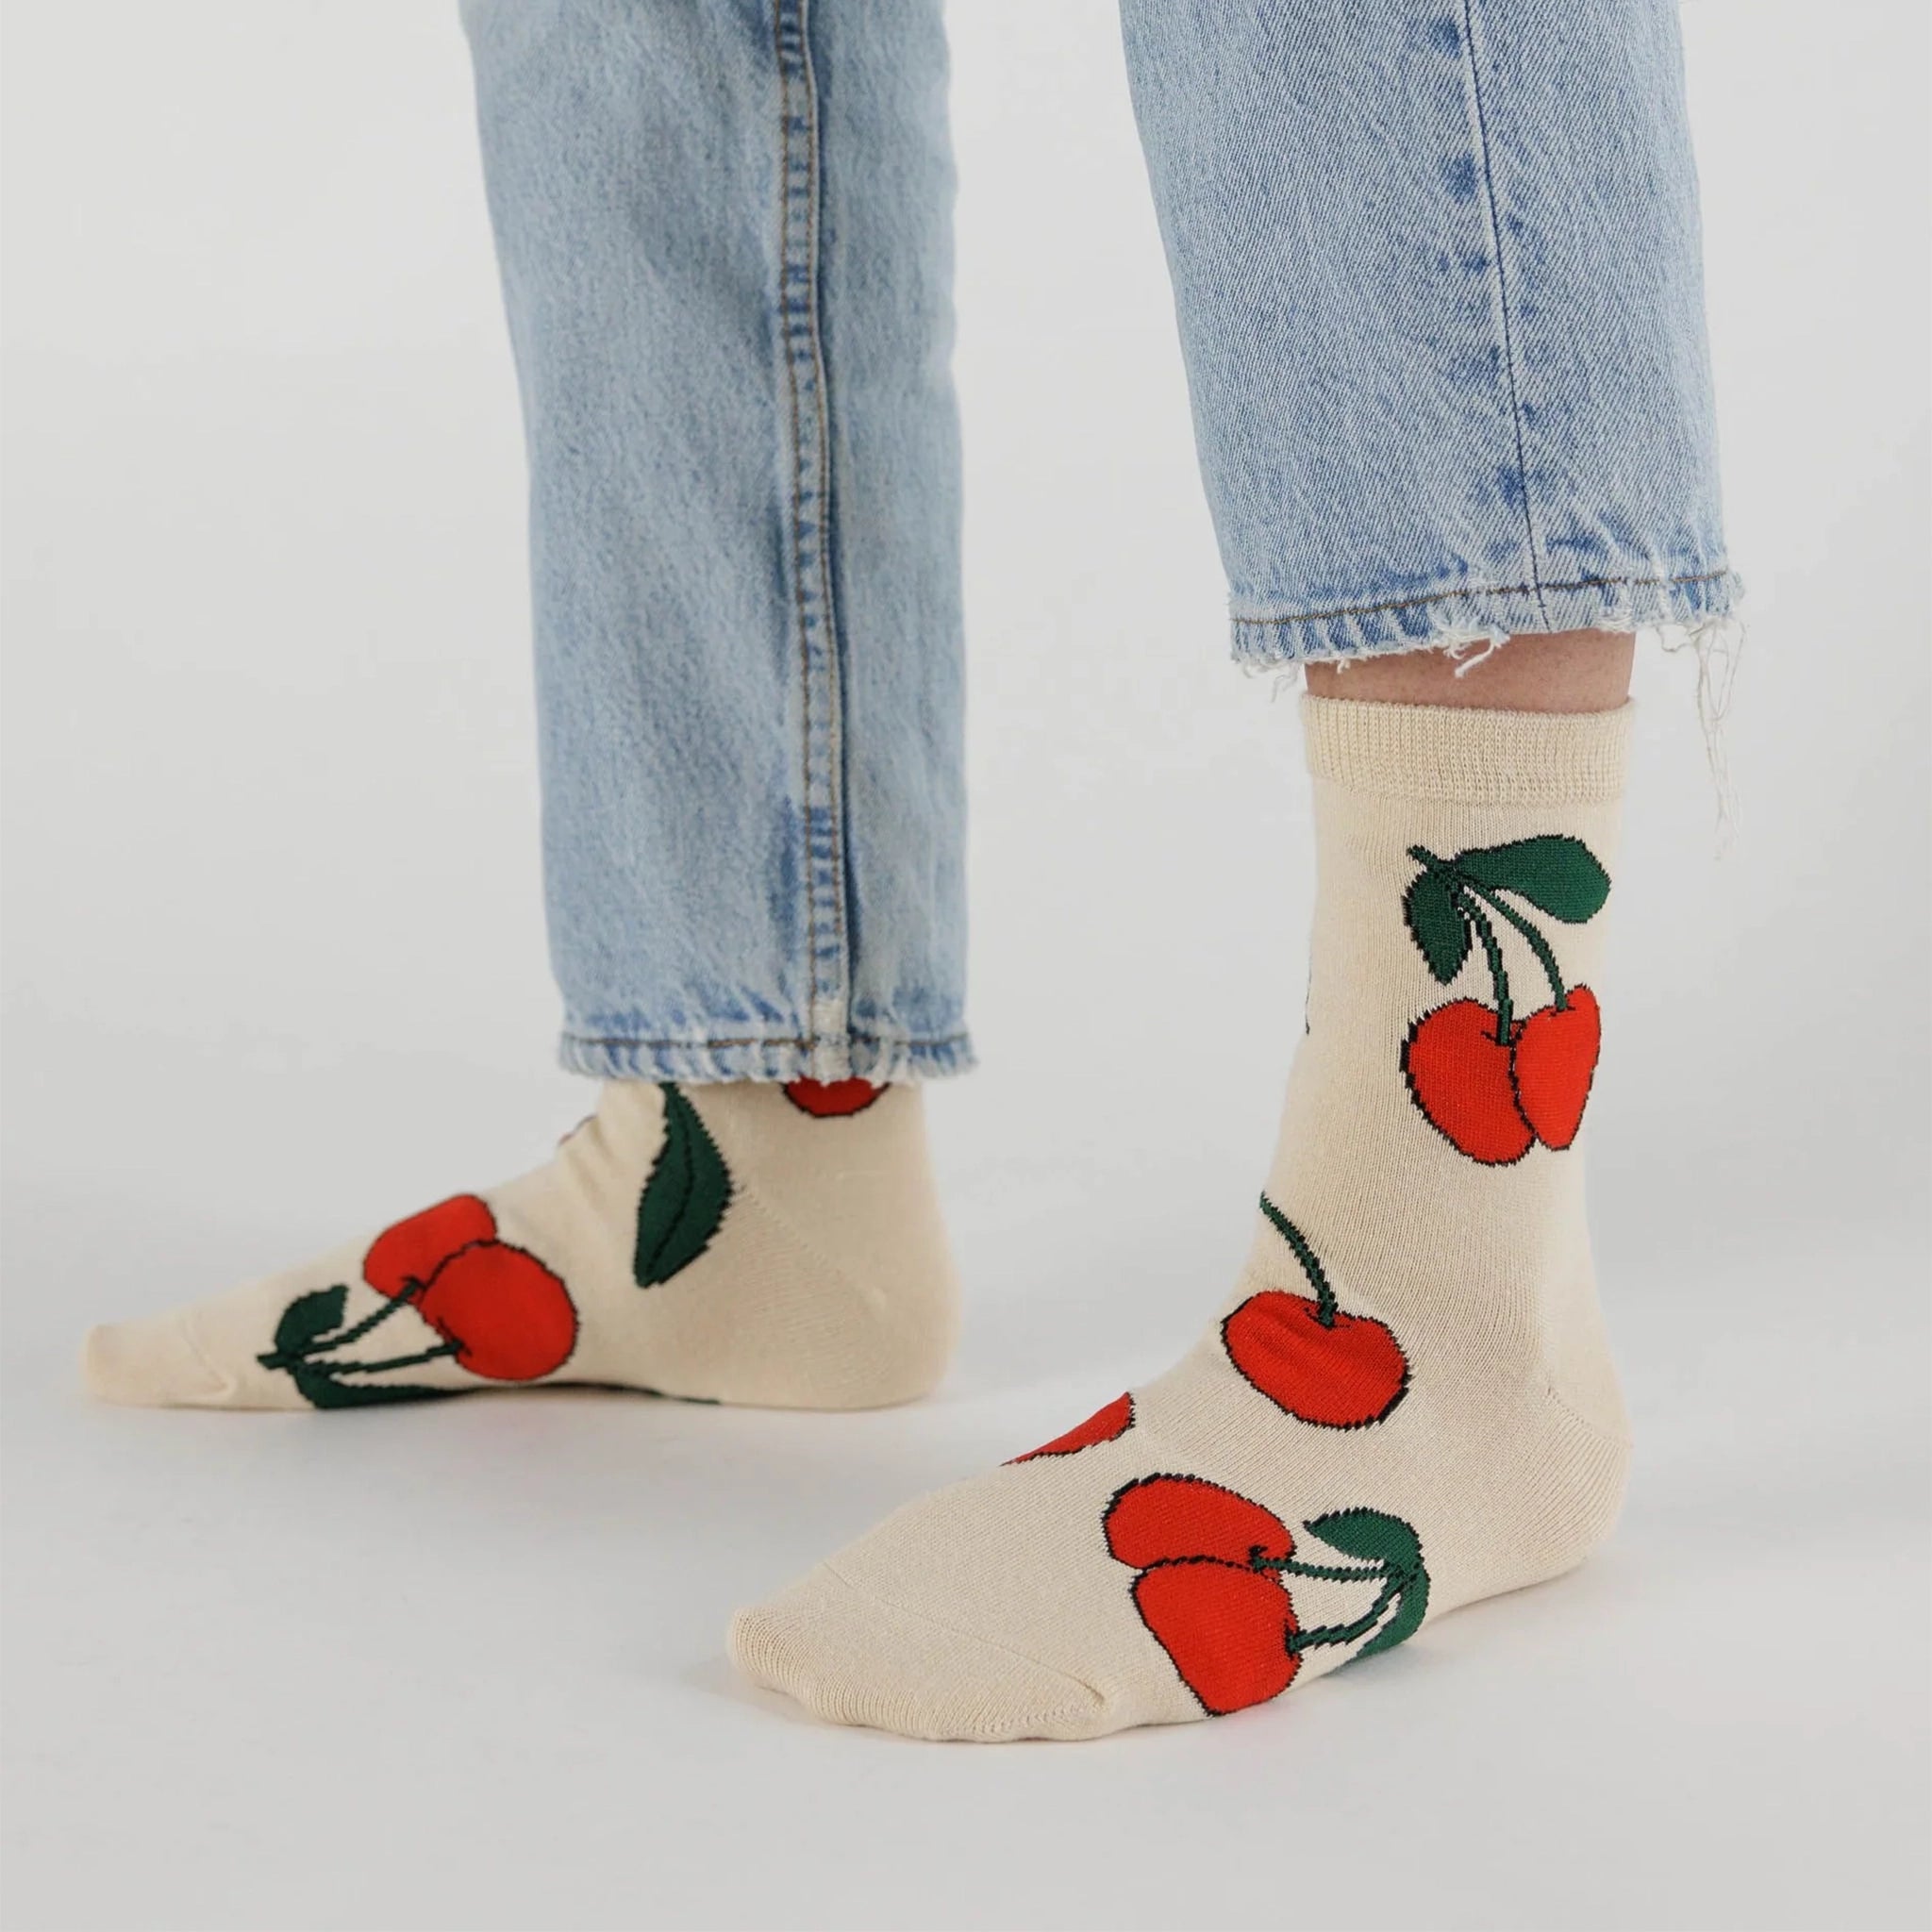 On a white background is a model wearing cream colored socks with a bright red cherries design on it along with &quot;Baggu&quot; on the bottom of the foot.